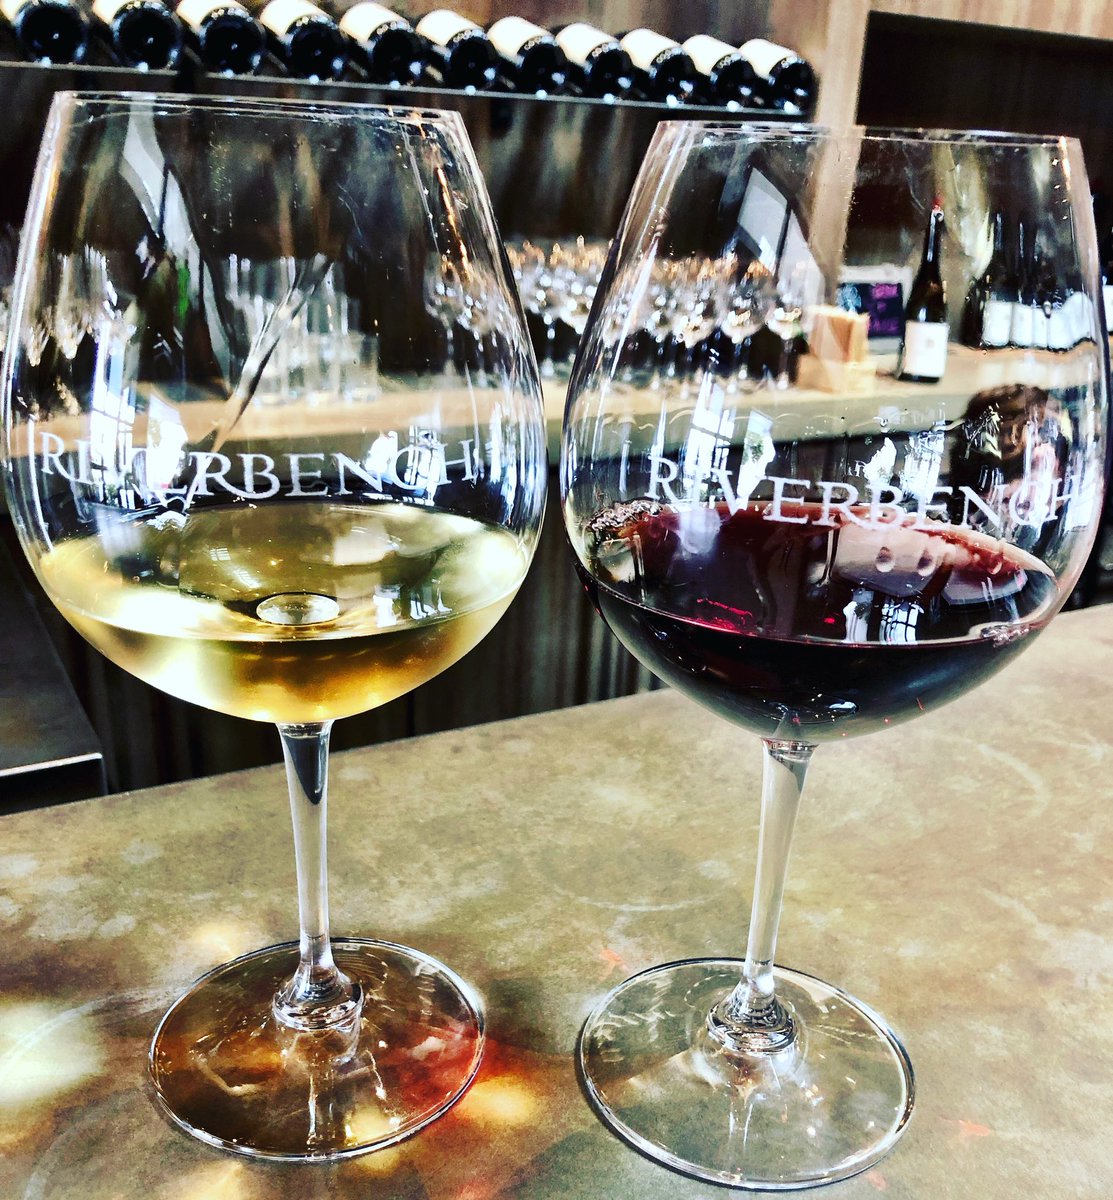 Toasting #wine #wednesday with a stop @Riverbench in #santabarbara #funkzone They offer #winetasting and #winebytheglass #cheers